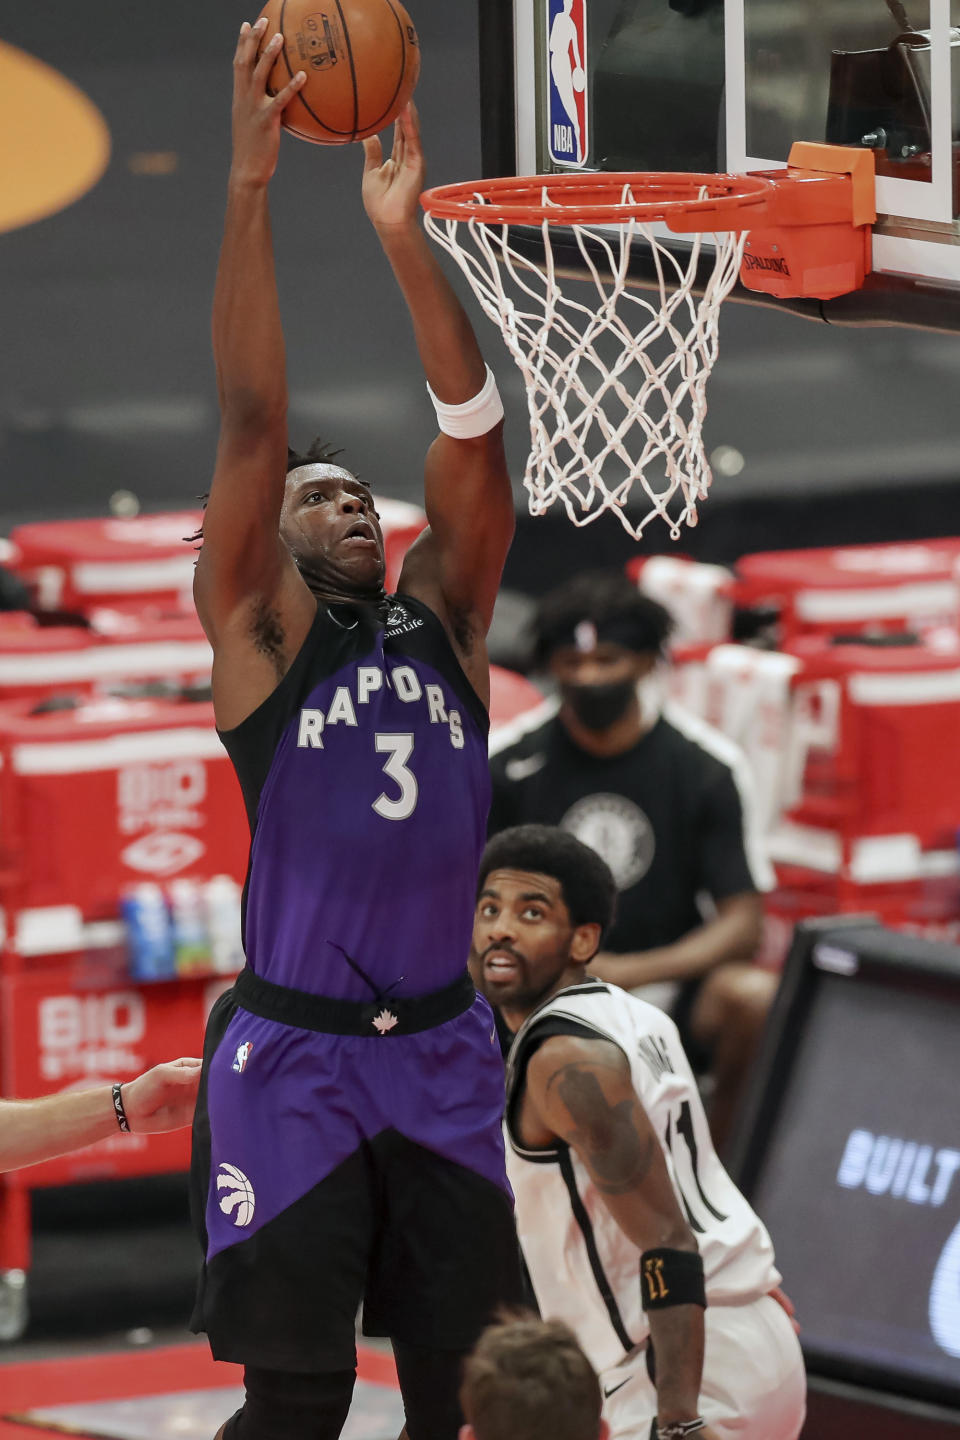 Toronto Raptors' OG Anunoby dunks past Brooklyn Nets' Kyrie Irving during the second half of an NBA basketball game Wednesday, April 21, 2021, in Tampa, Fla. (AP Photo/Mike Carlson)